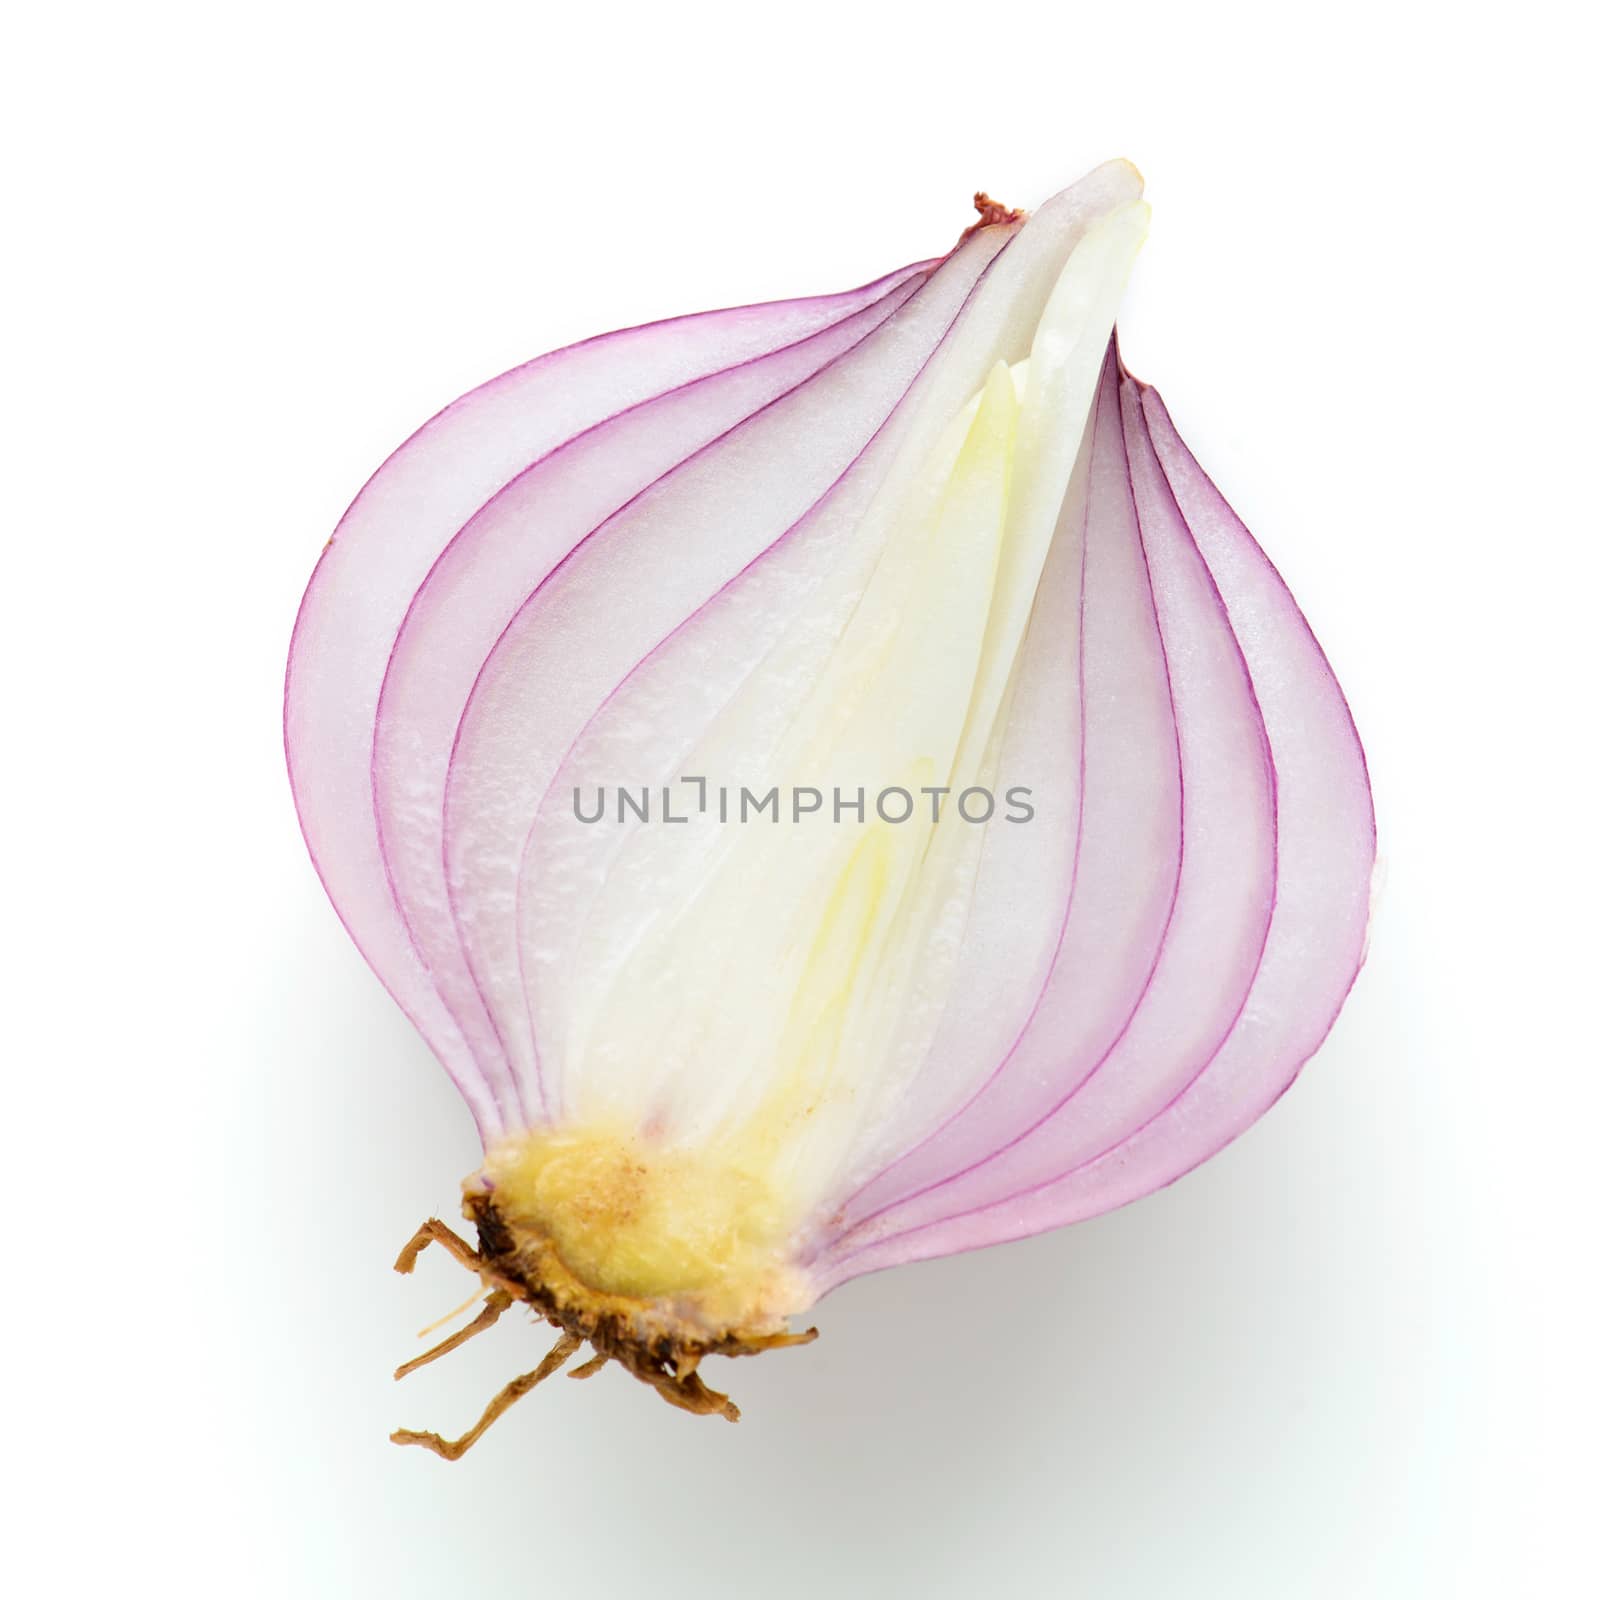 red onion by antpkr